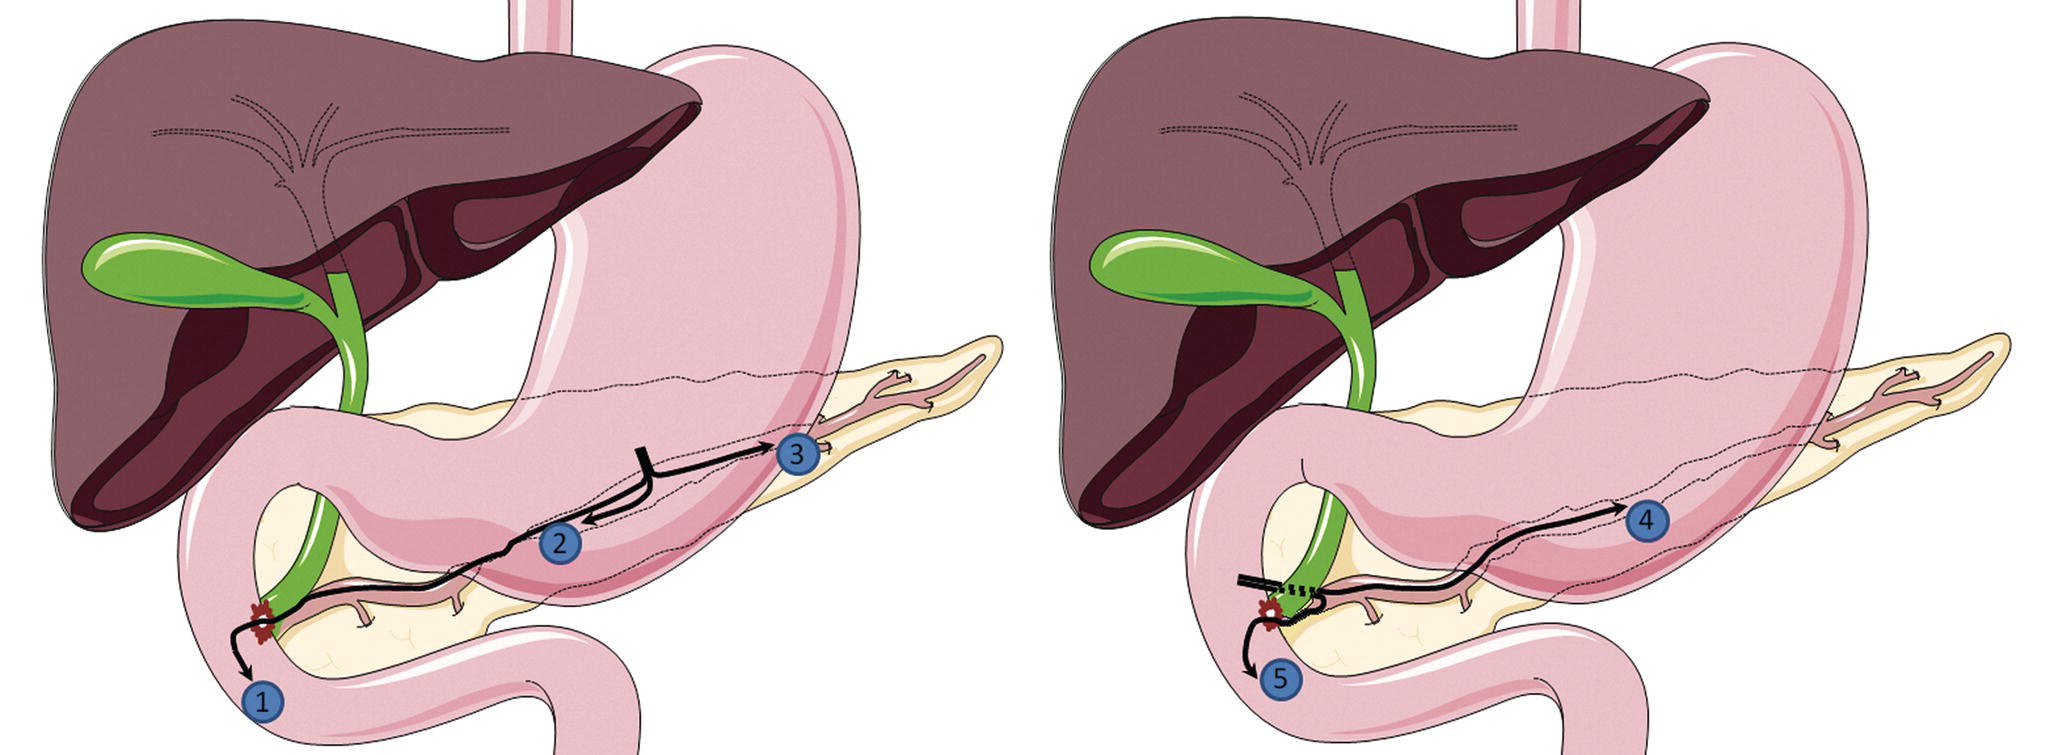 Schematic illustration of access points and routes for EUS-PDD: 1, transgastric rendezvous; 2, transgastric MPD access for antegrade stenting; 3, transgastric MPD access for retrograde stenting; 4, transduodenal MPD access for retrograde stenting; 5, transduodenal rendezvous.